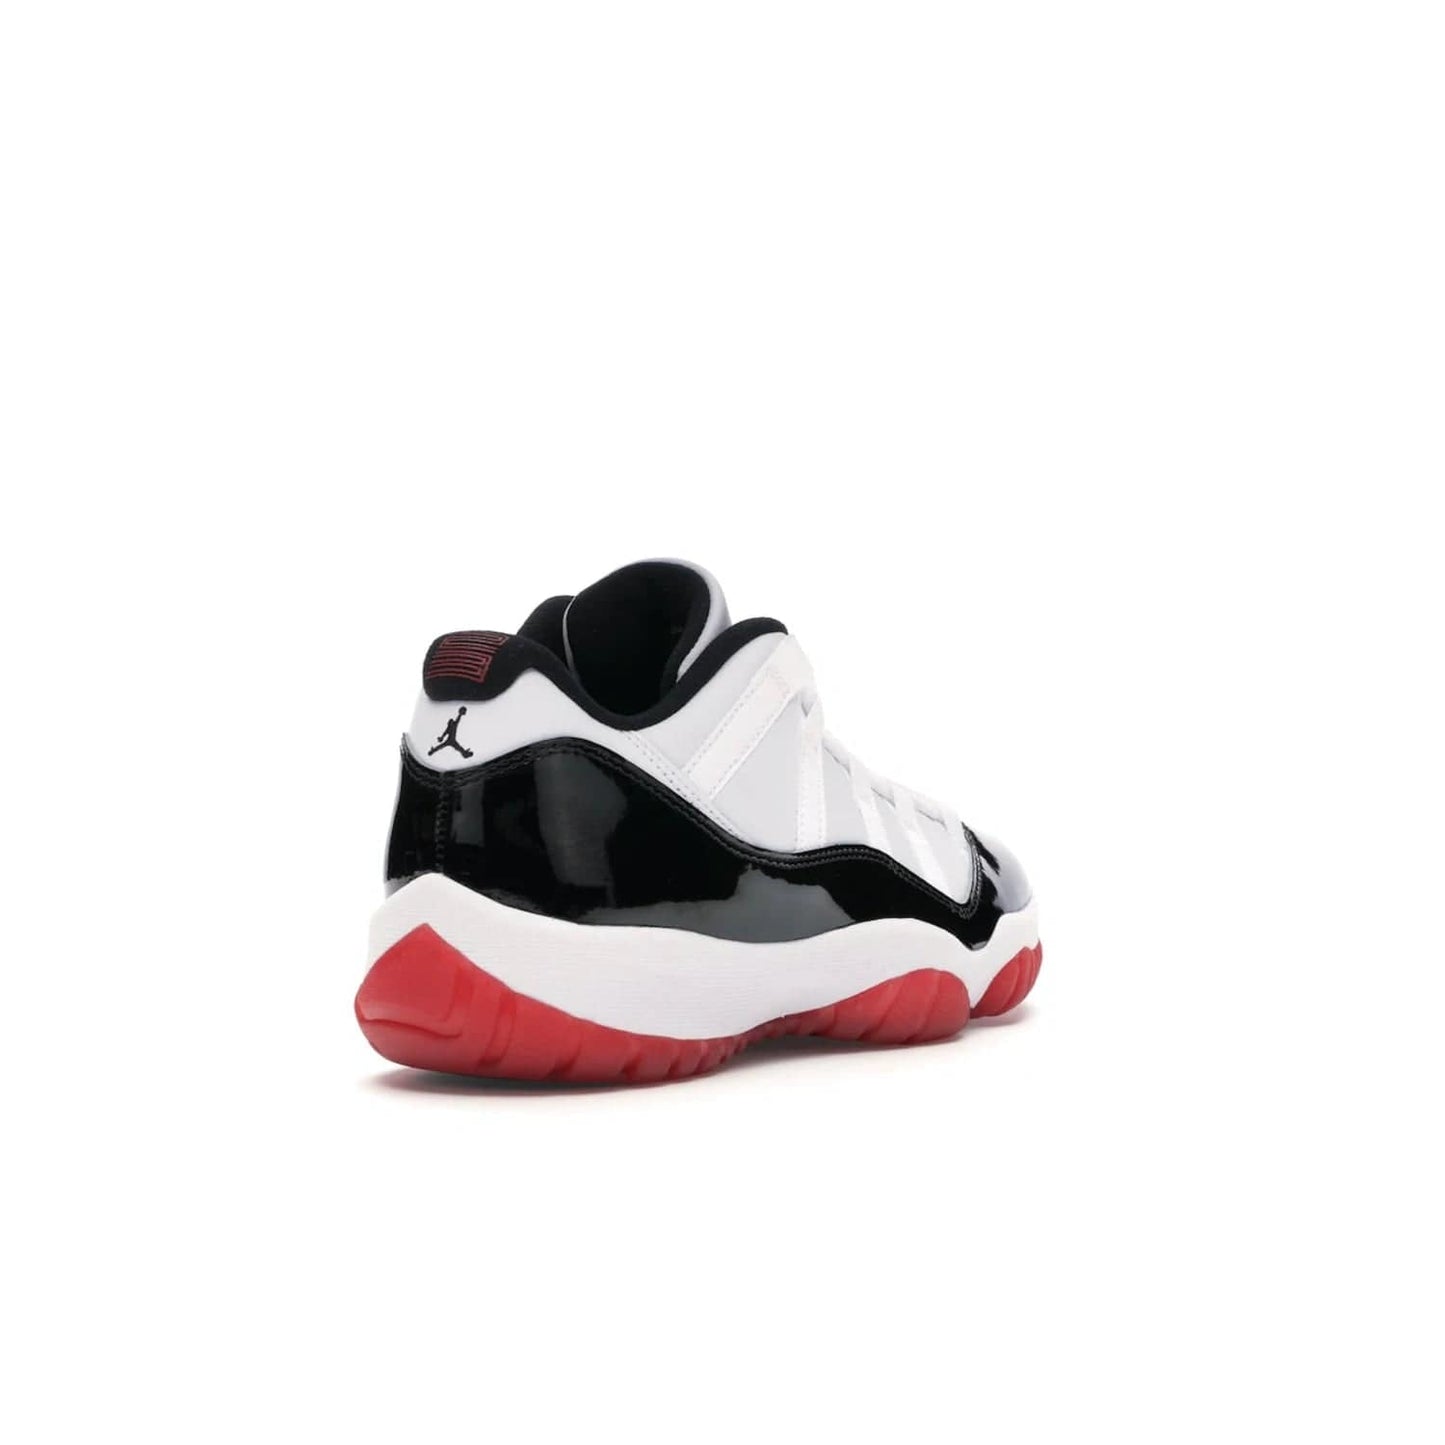 Jordan 11 Retro Low Concord Bred - Image 31 - Only at www.BallersClubKickz.com - Grab the classic Jordan 11 look with the Jordan 11 Retro Low Concord Bred. With white and black elements and the iconic red outsole of the Jordan 11 Bred, you won't miss a beat. Released in June 2020, the perfect complement to any outfit.